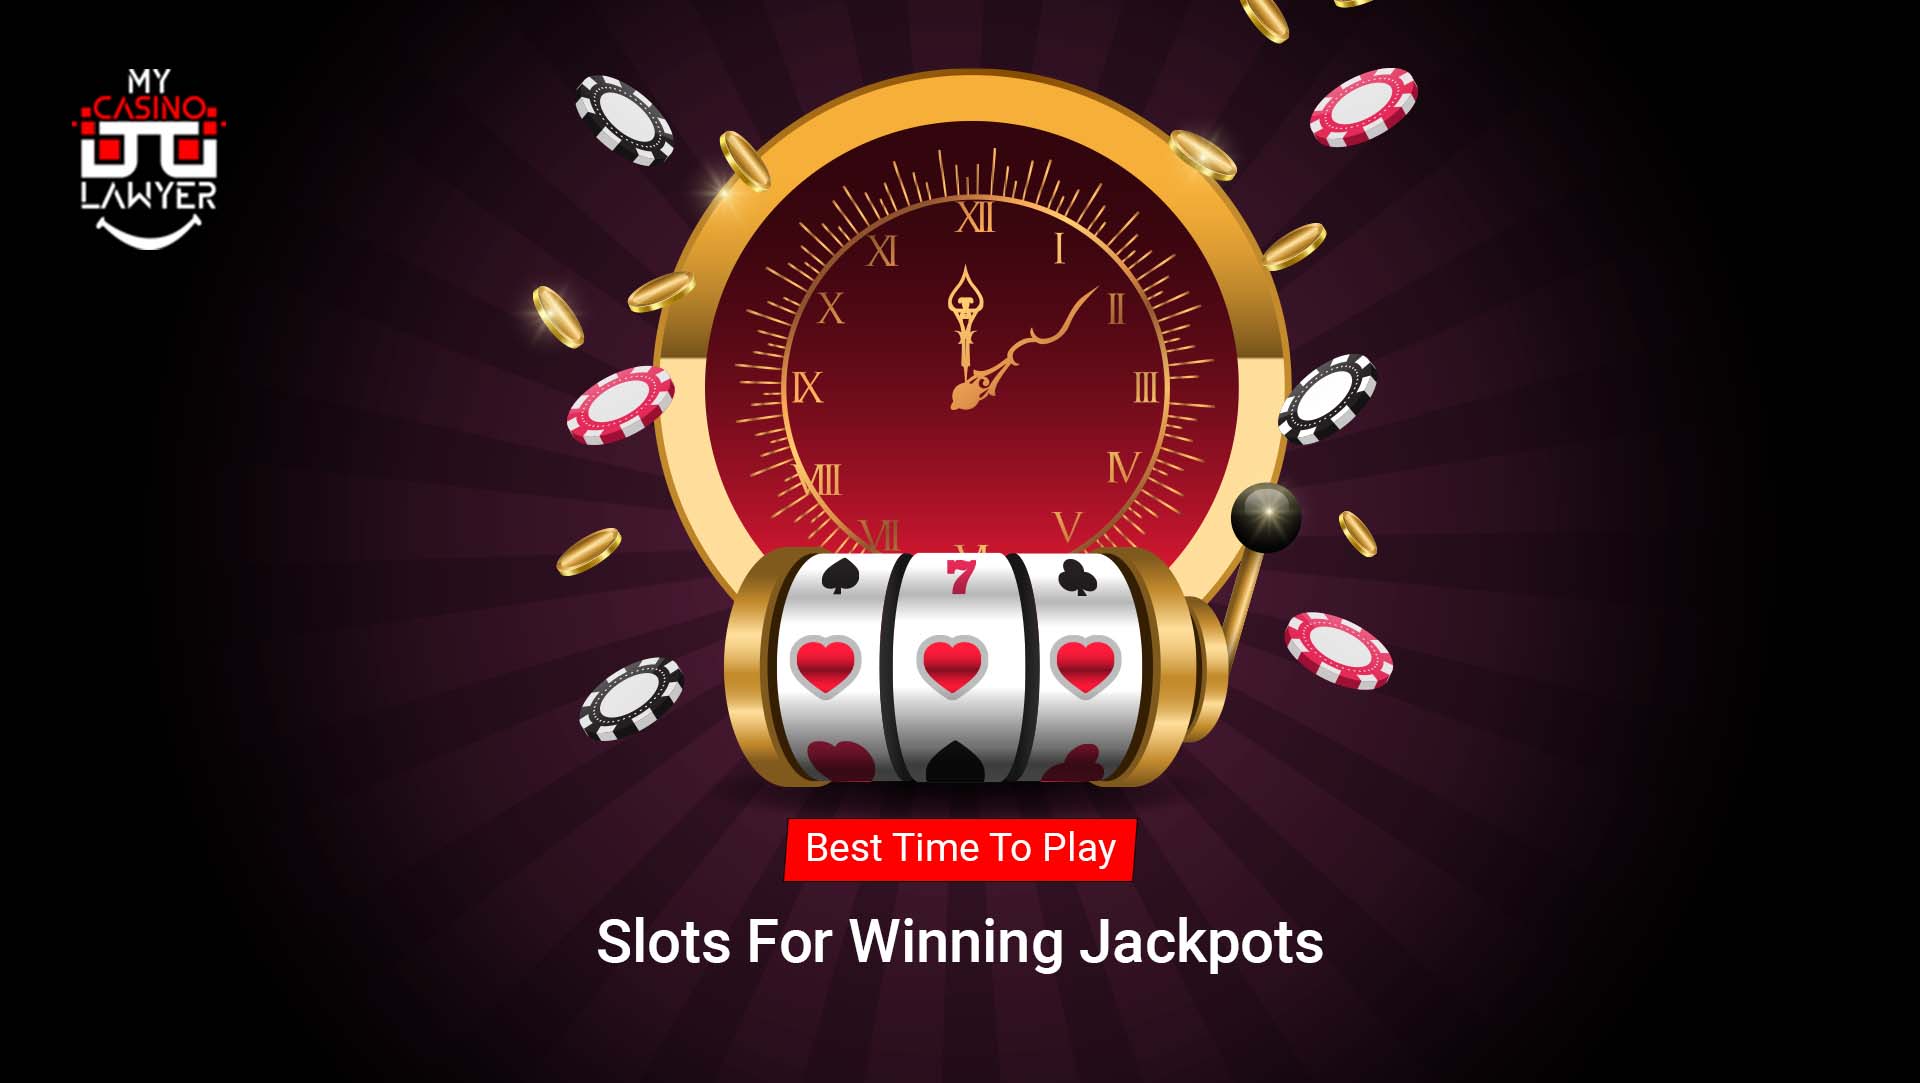 Best Time To Play Slots For Winning Jackpots